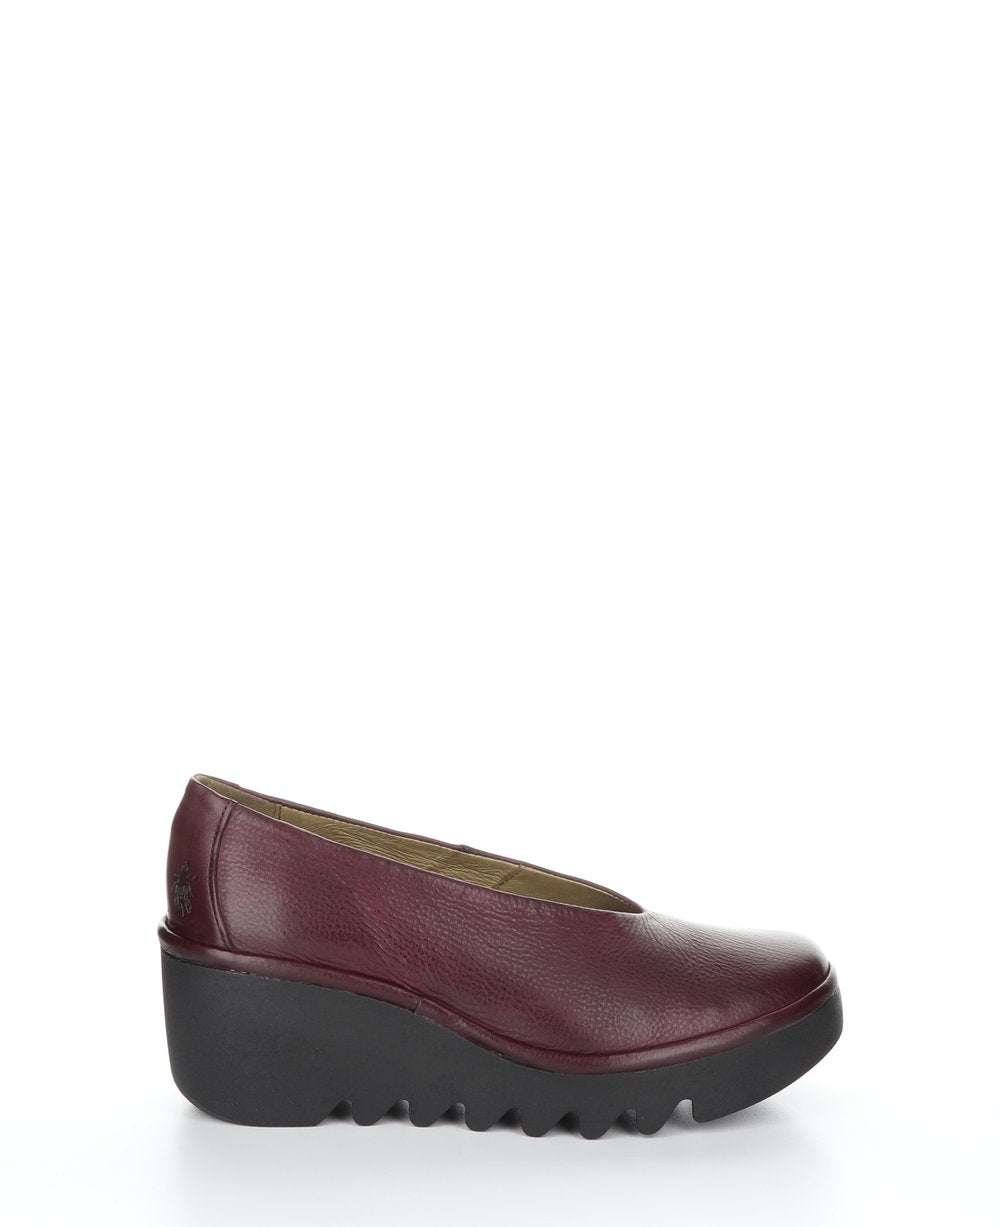 Fly London YBESO246FLY VERONA Wine WEDGE SHOES